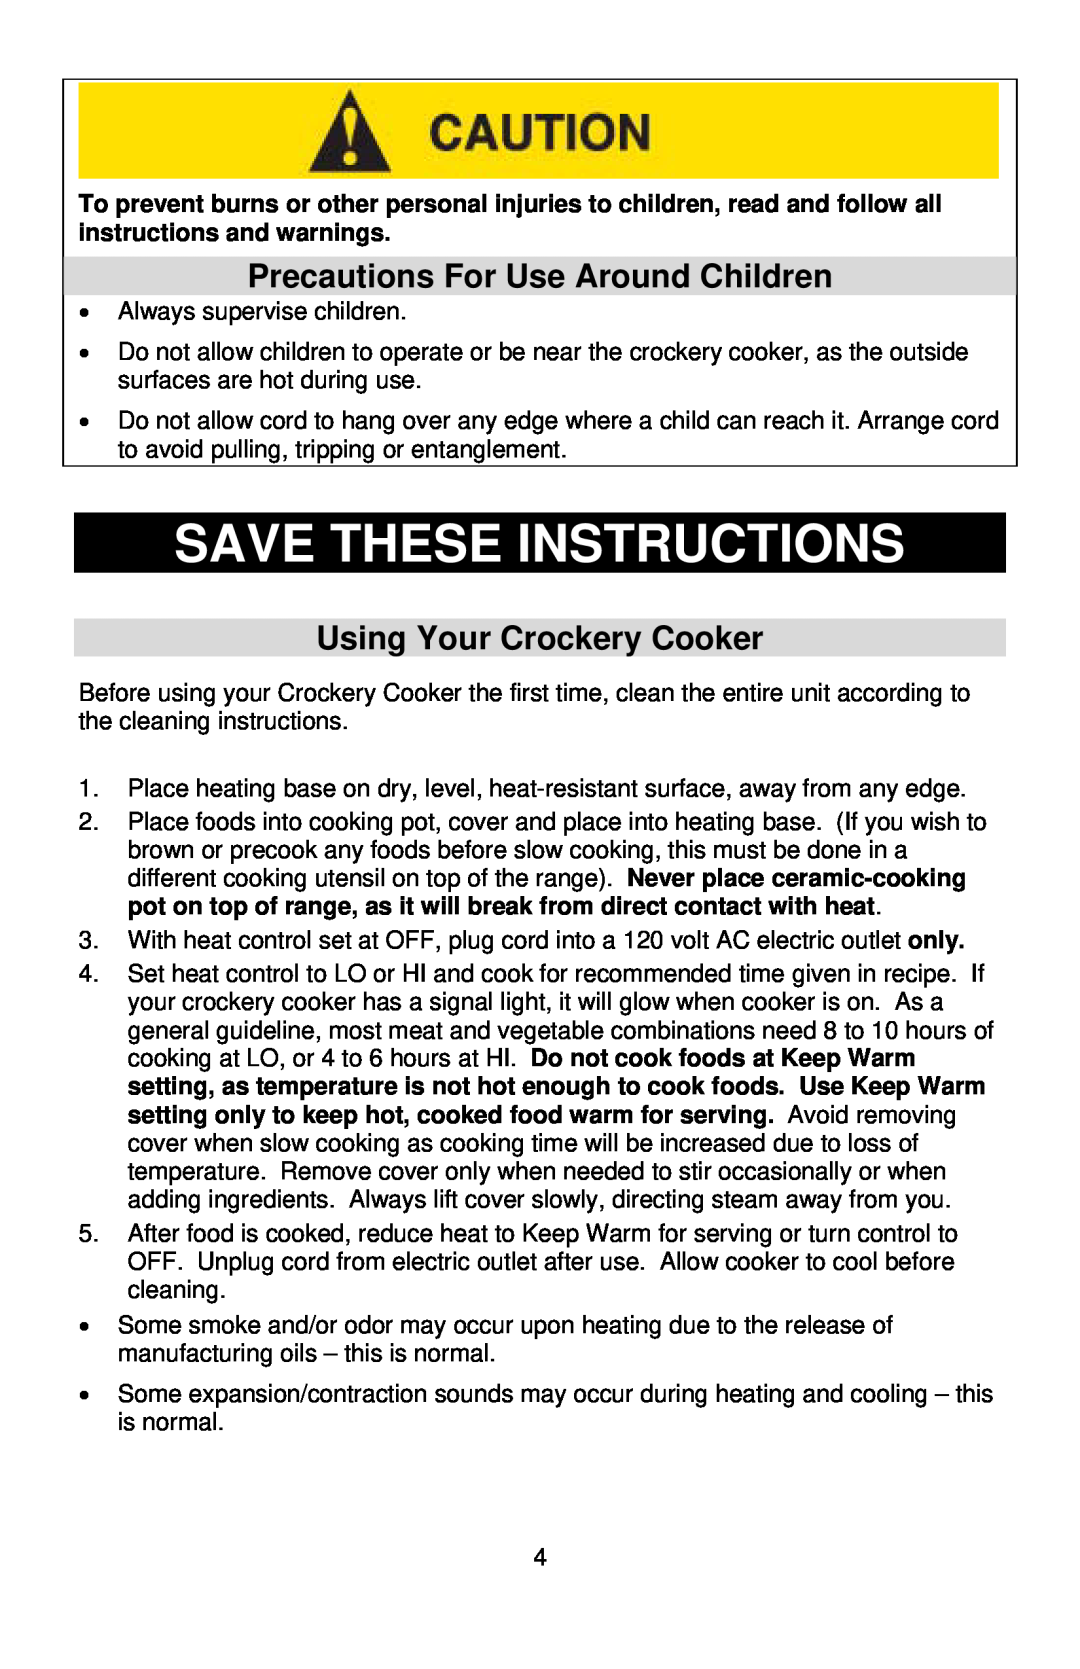 West Bend 3-4 Quart Crockery Cooker instruction manual Save These Instructions, Precautions For Use Around Children 